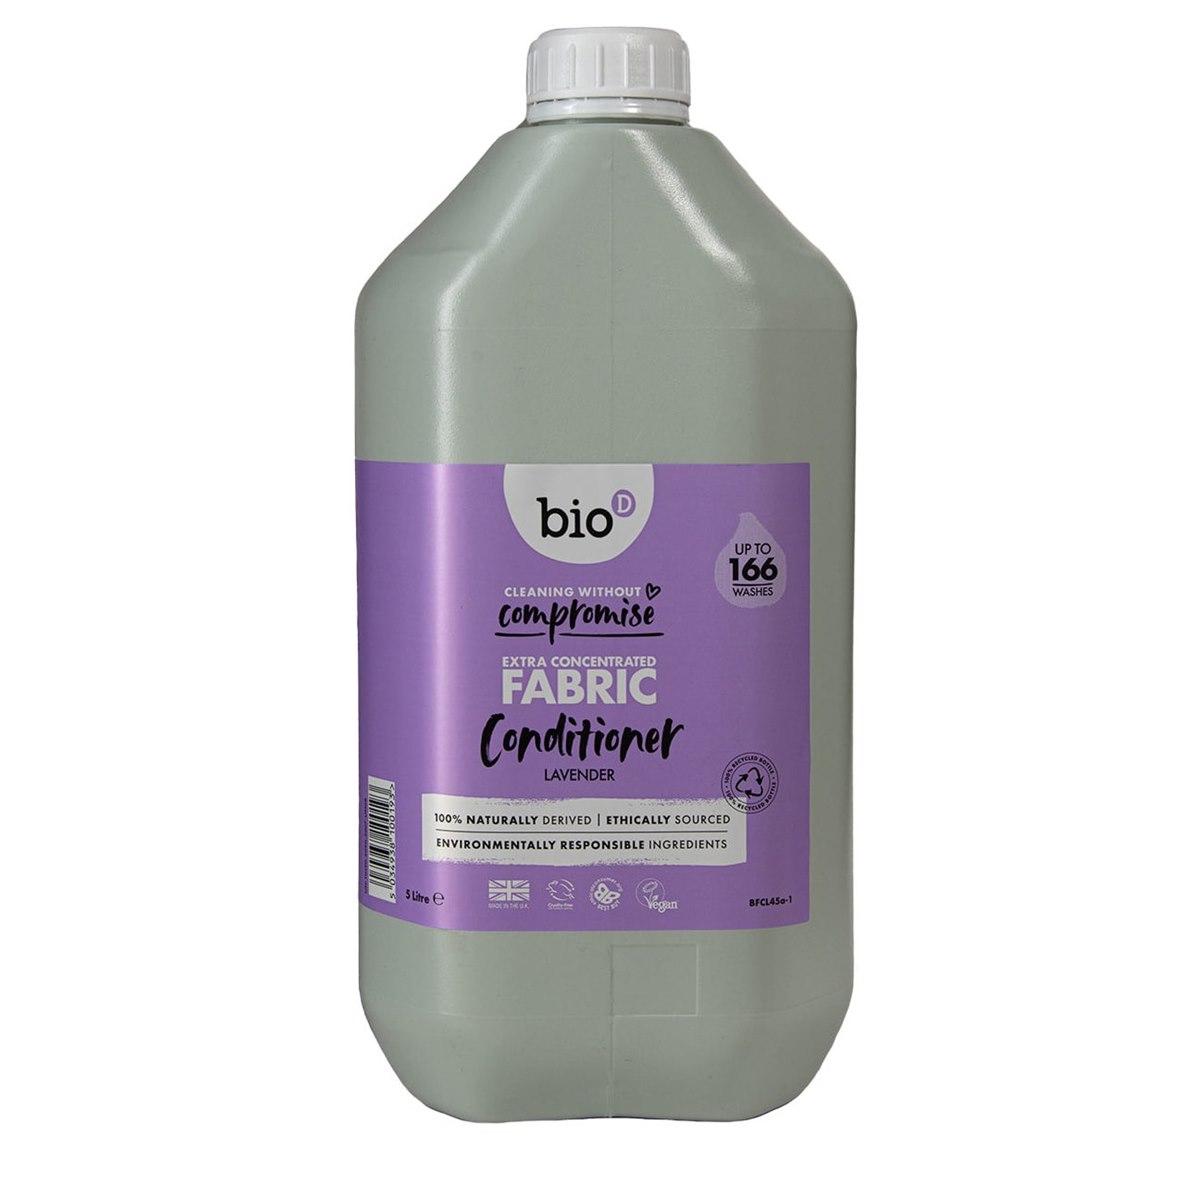 Bio D Extra Concentrated Fabric Conditioner Lavender 5 Litre Refill